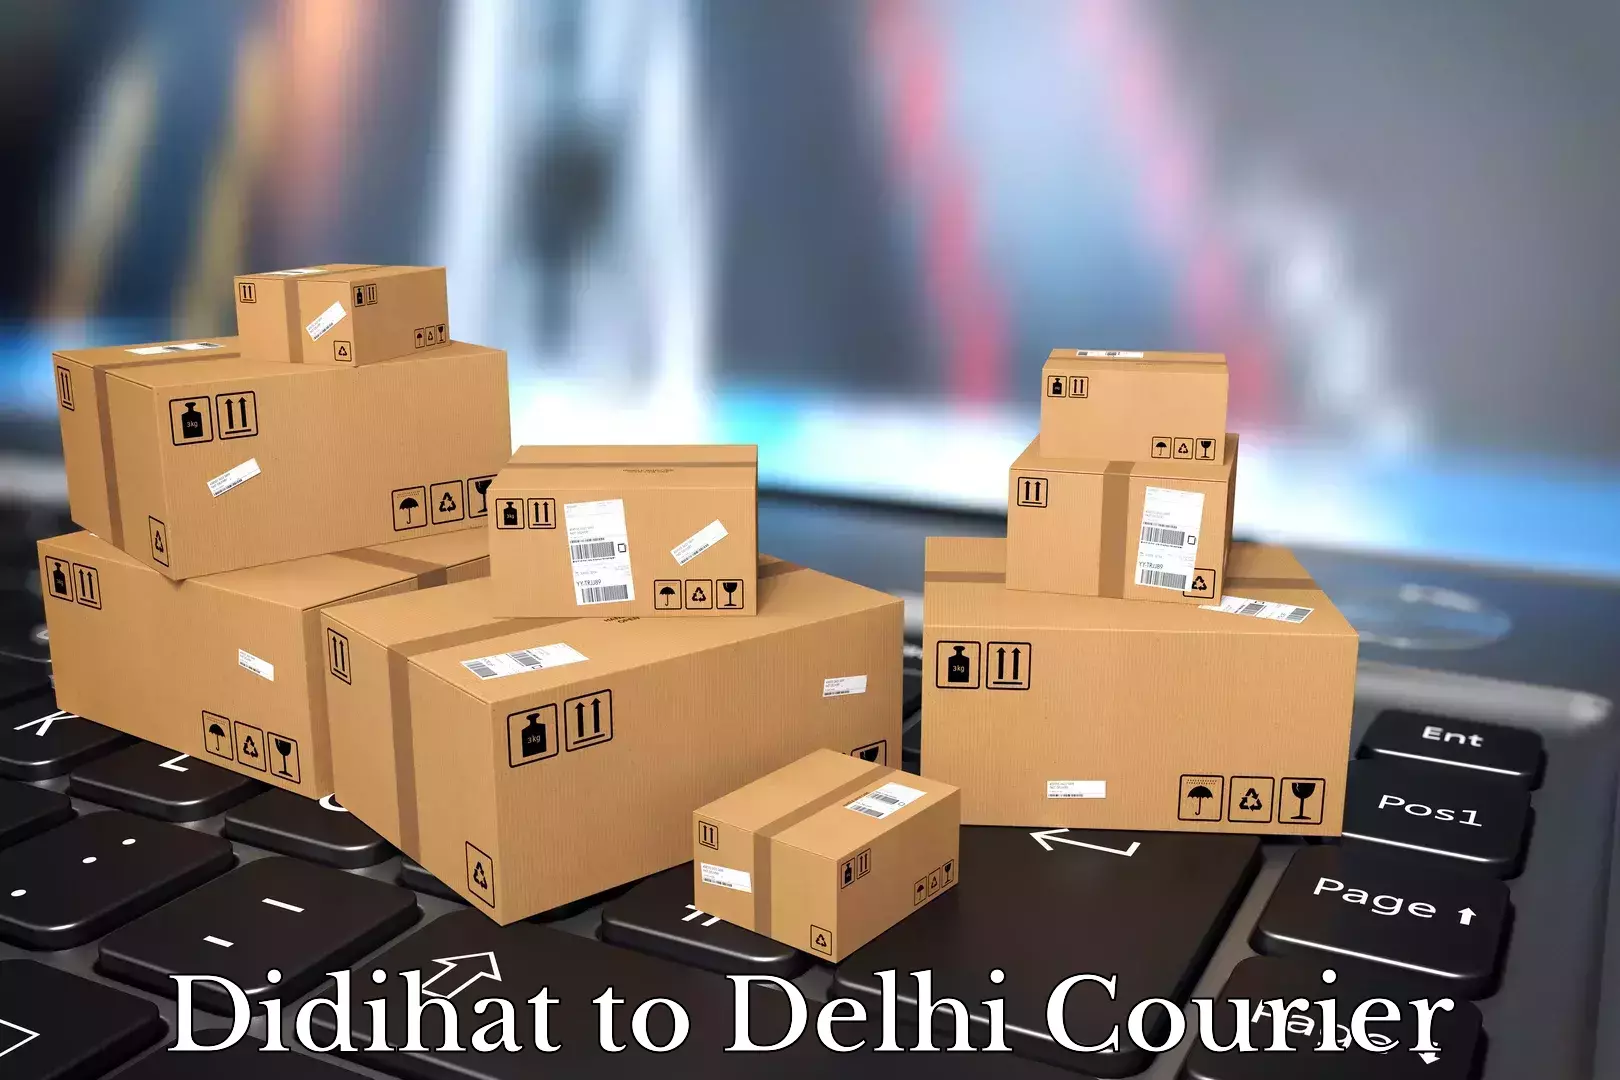 Home moving experts Didihat to Delhi